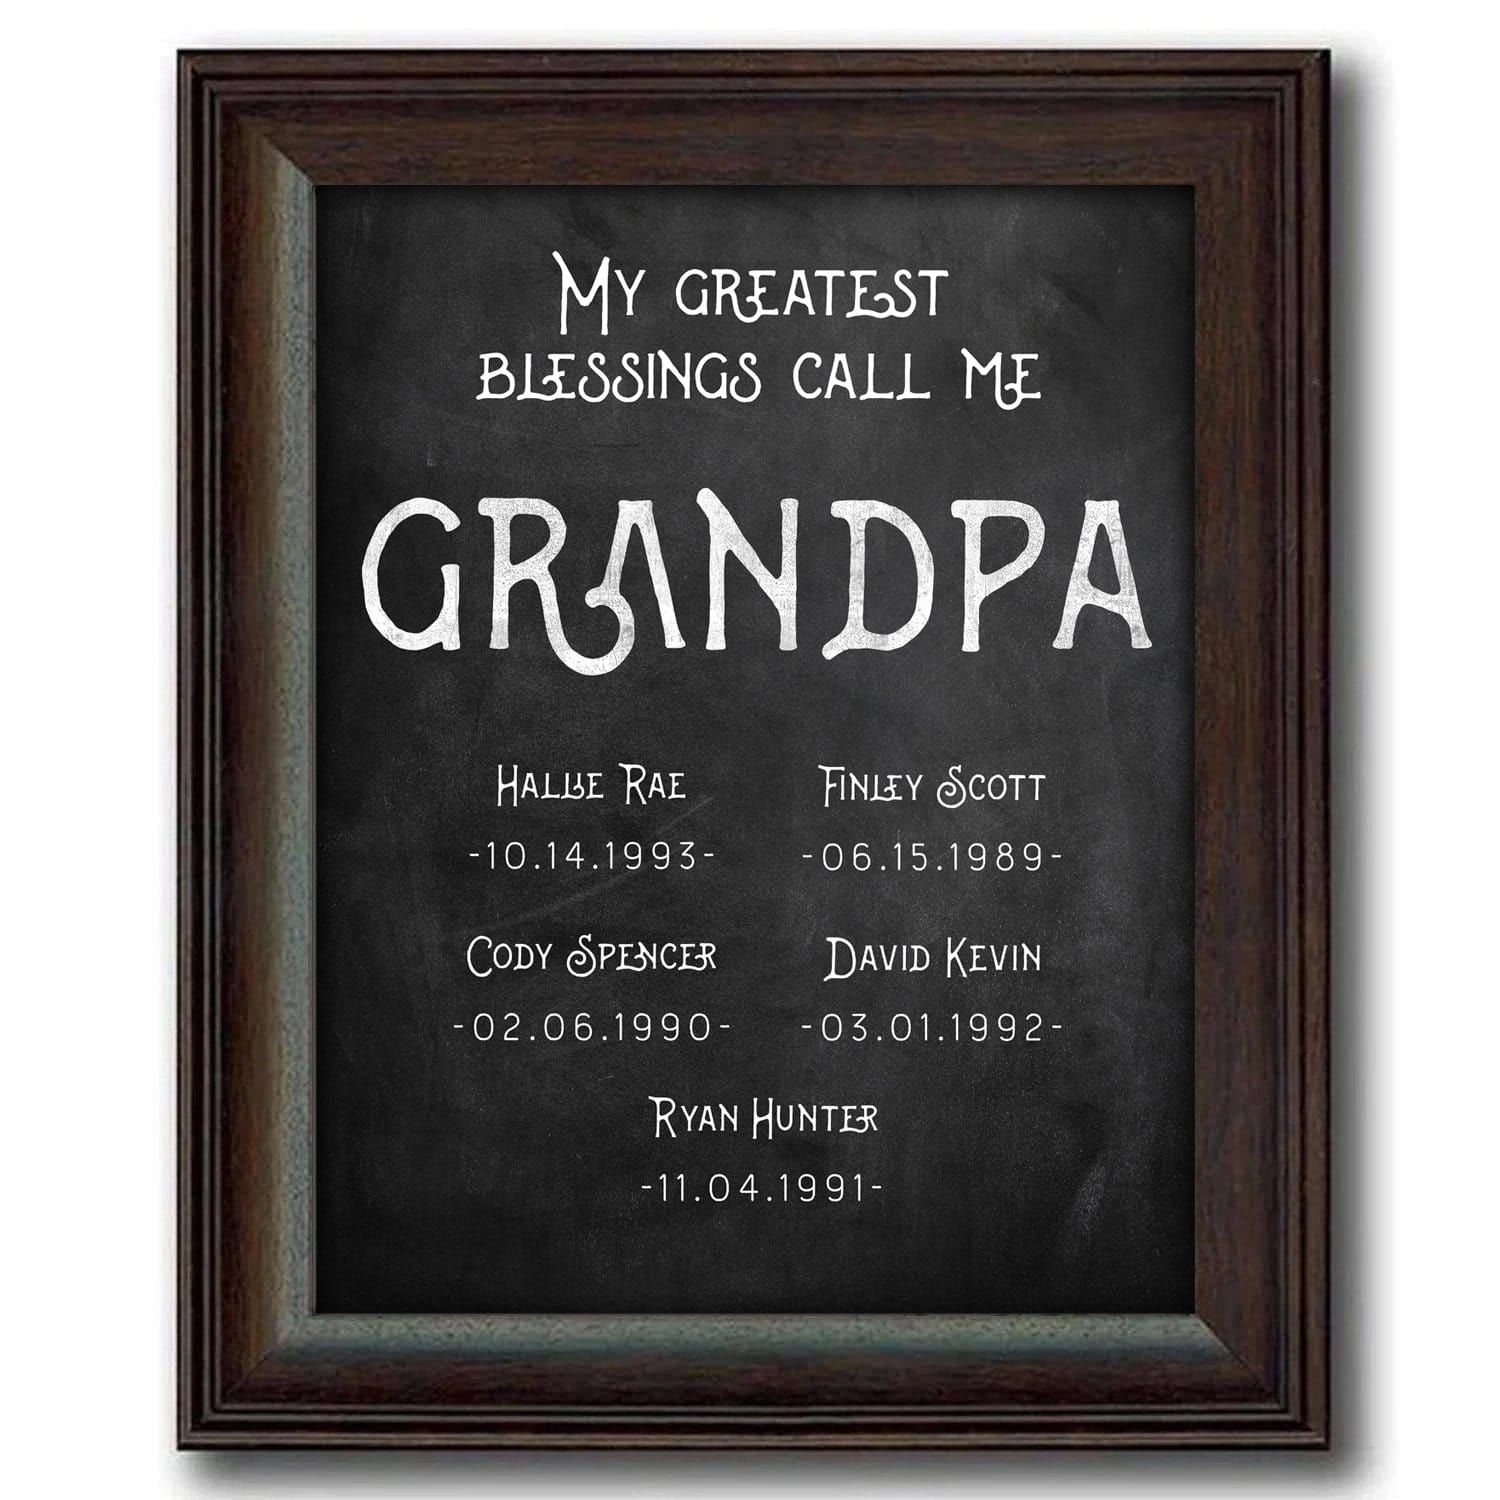 Personalized Gifts for Grandparents - Personal Prints - Personal-Prints